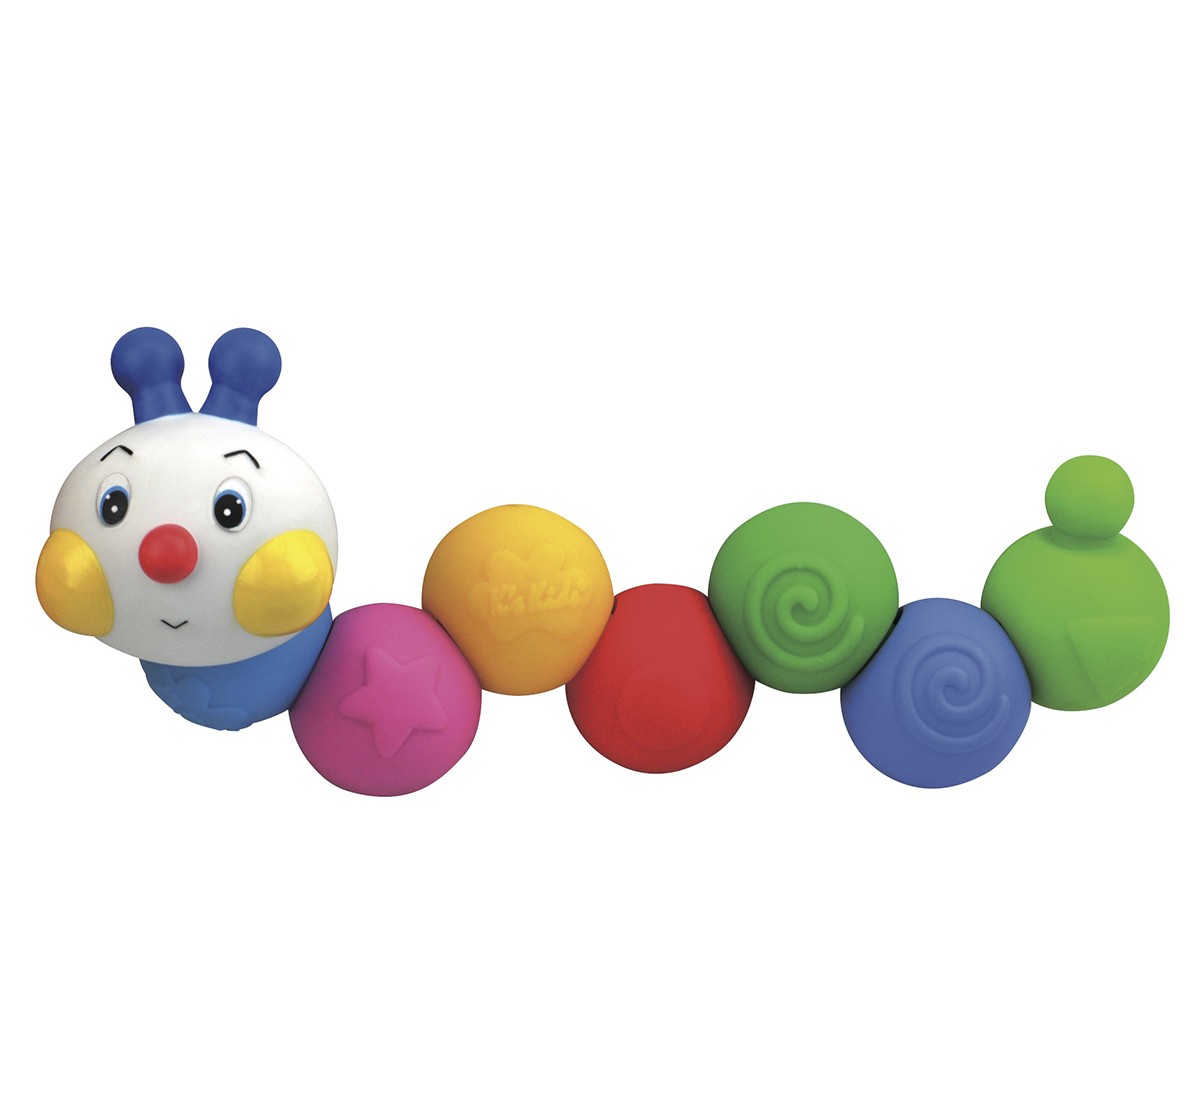 K'S Kids Popbo Blocks - Chain-An-Inchworm, Multi Color Early Learner Toys for Kids age 1Y+ 